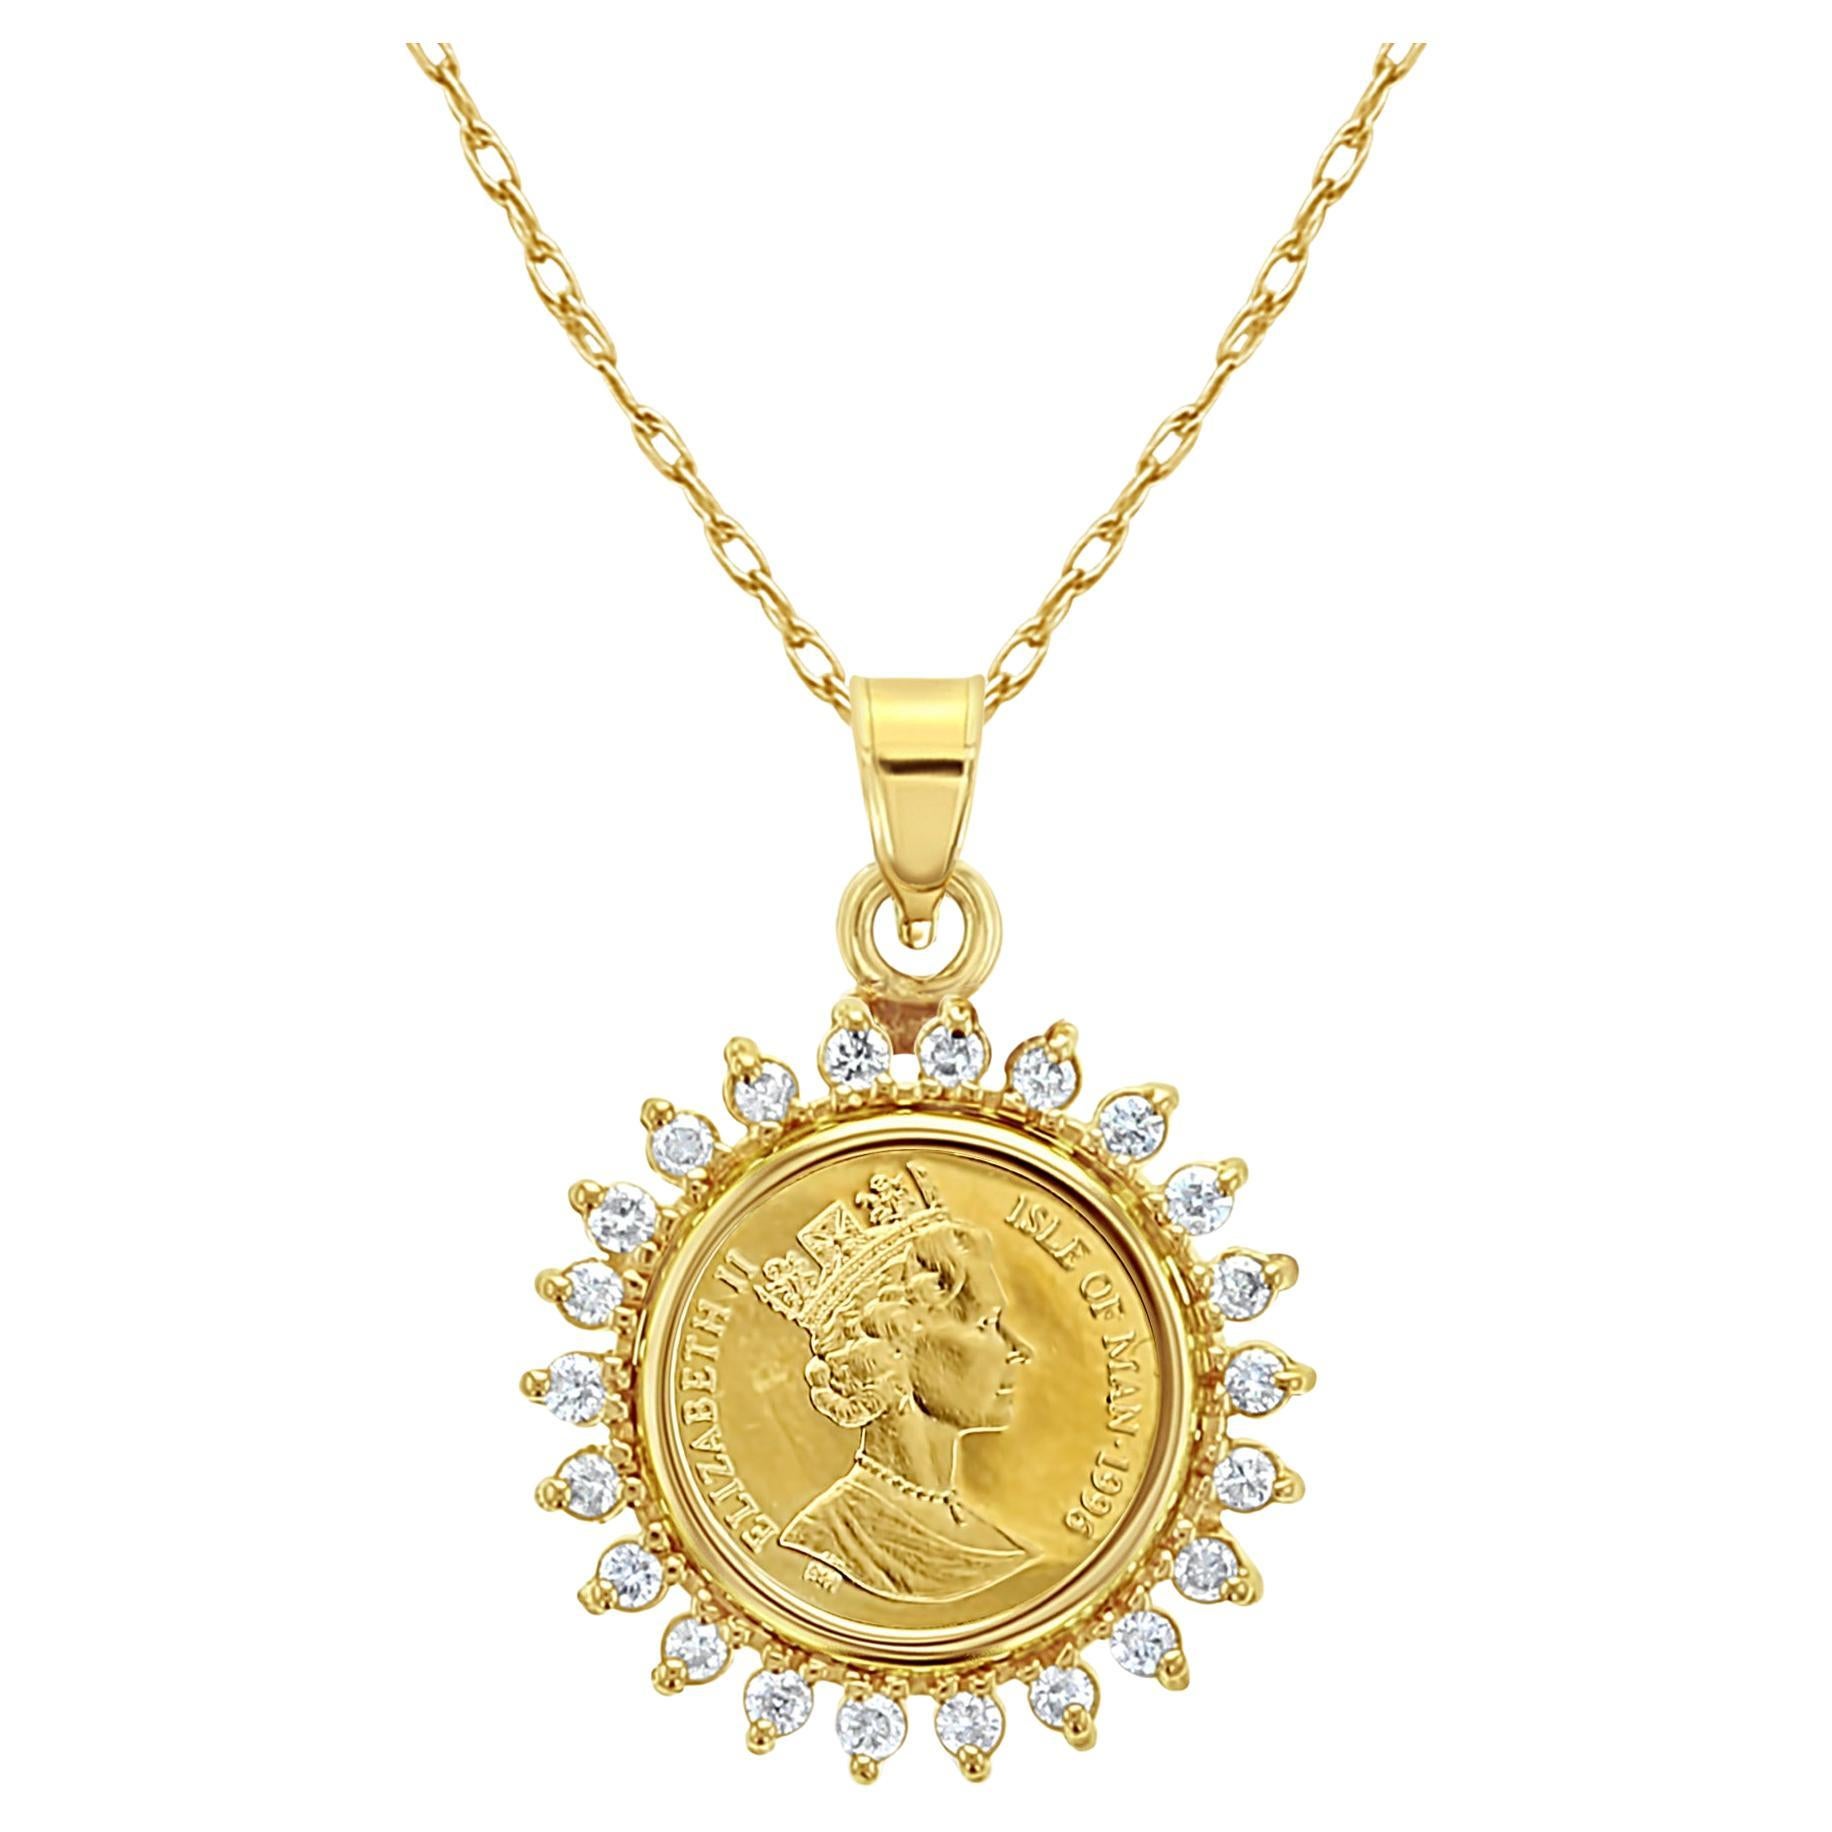 Elizabeth II Isle of Man Gold Coin Necklace with Diamond Halo For Sale